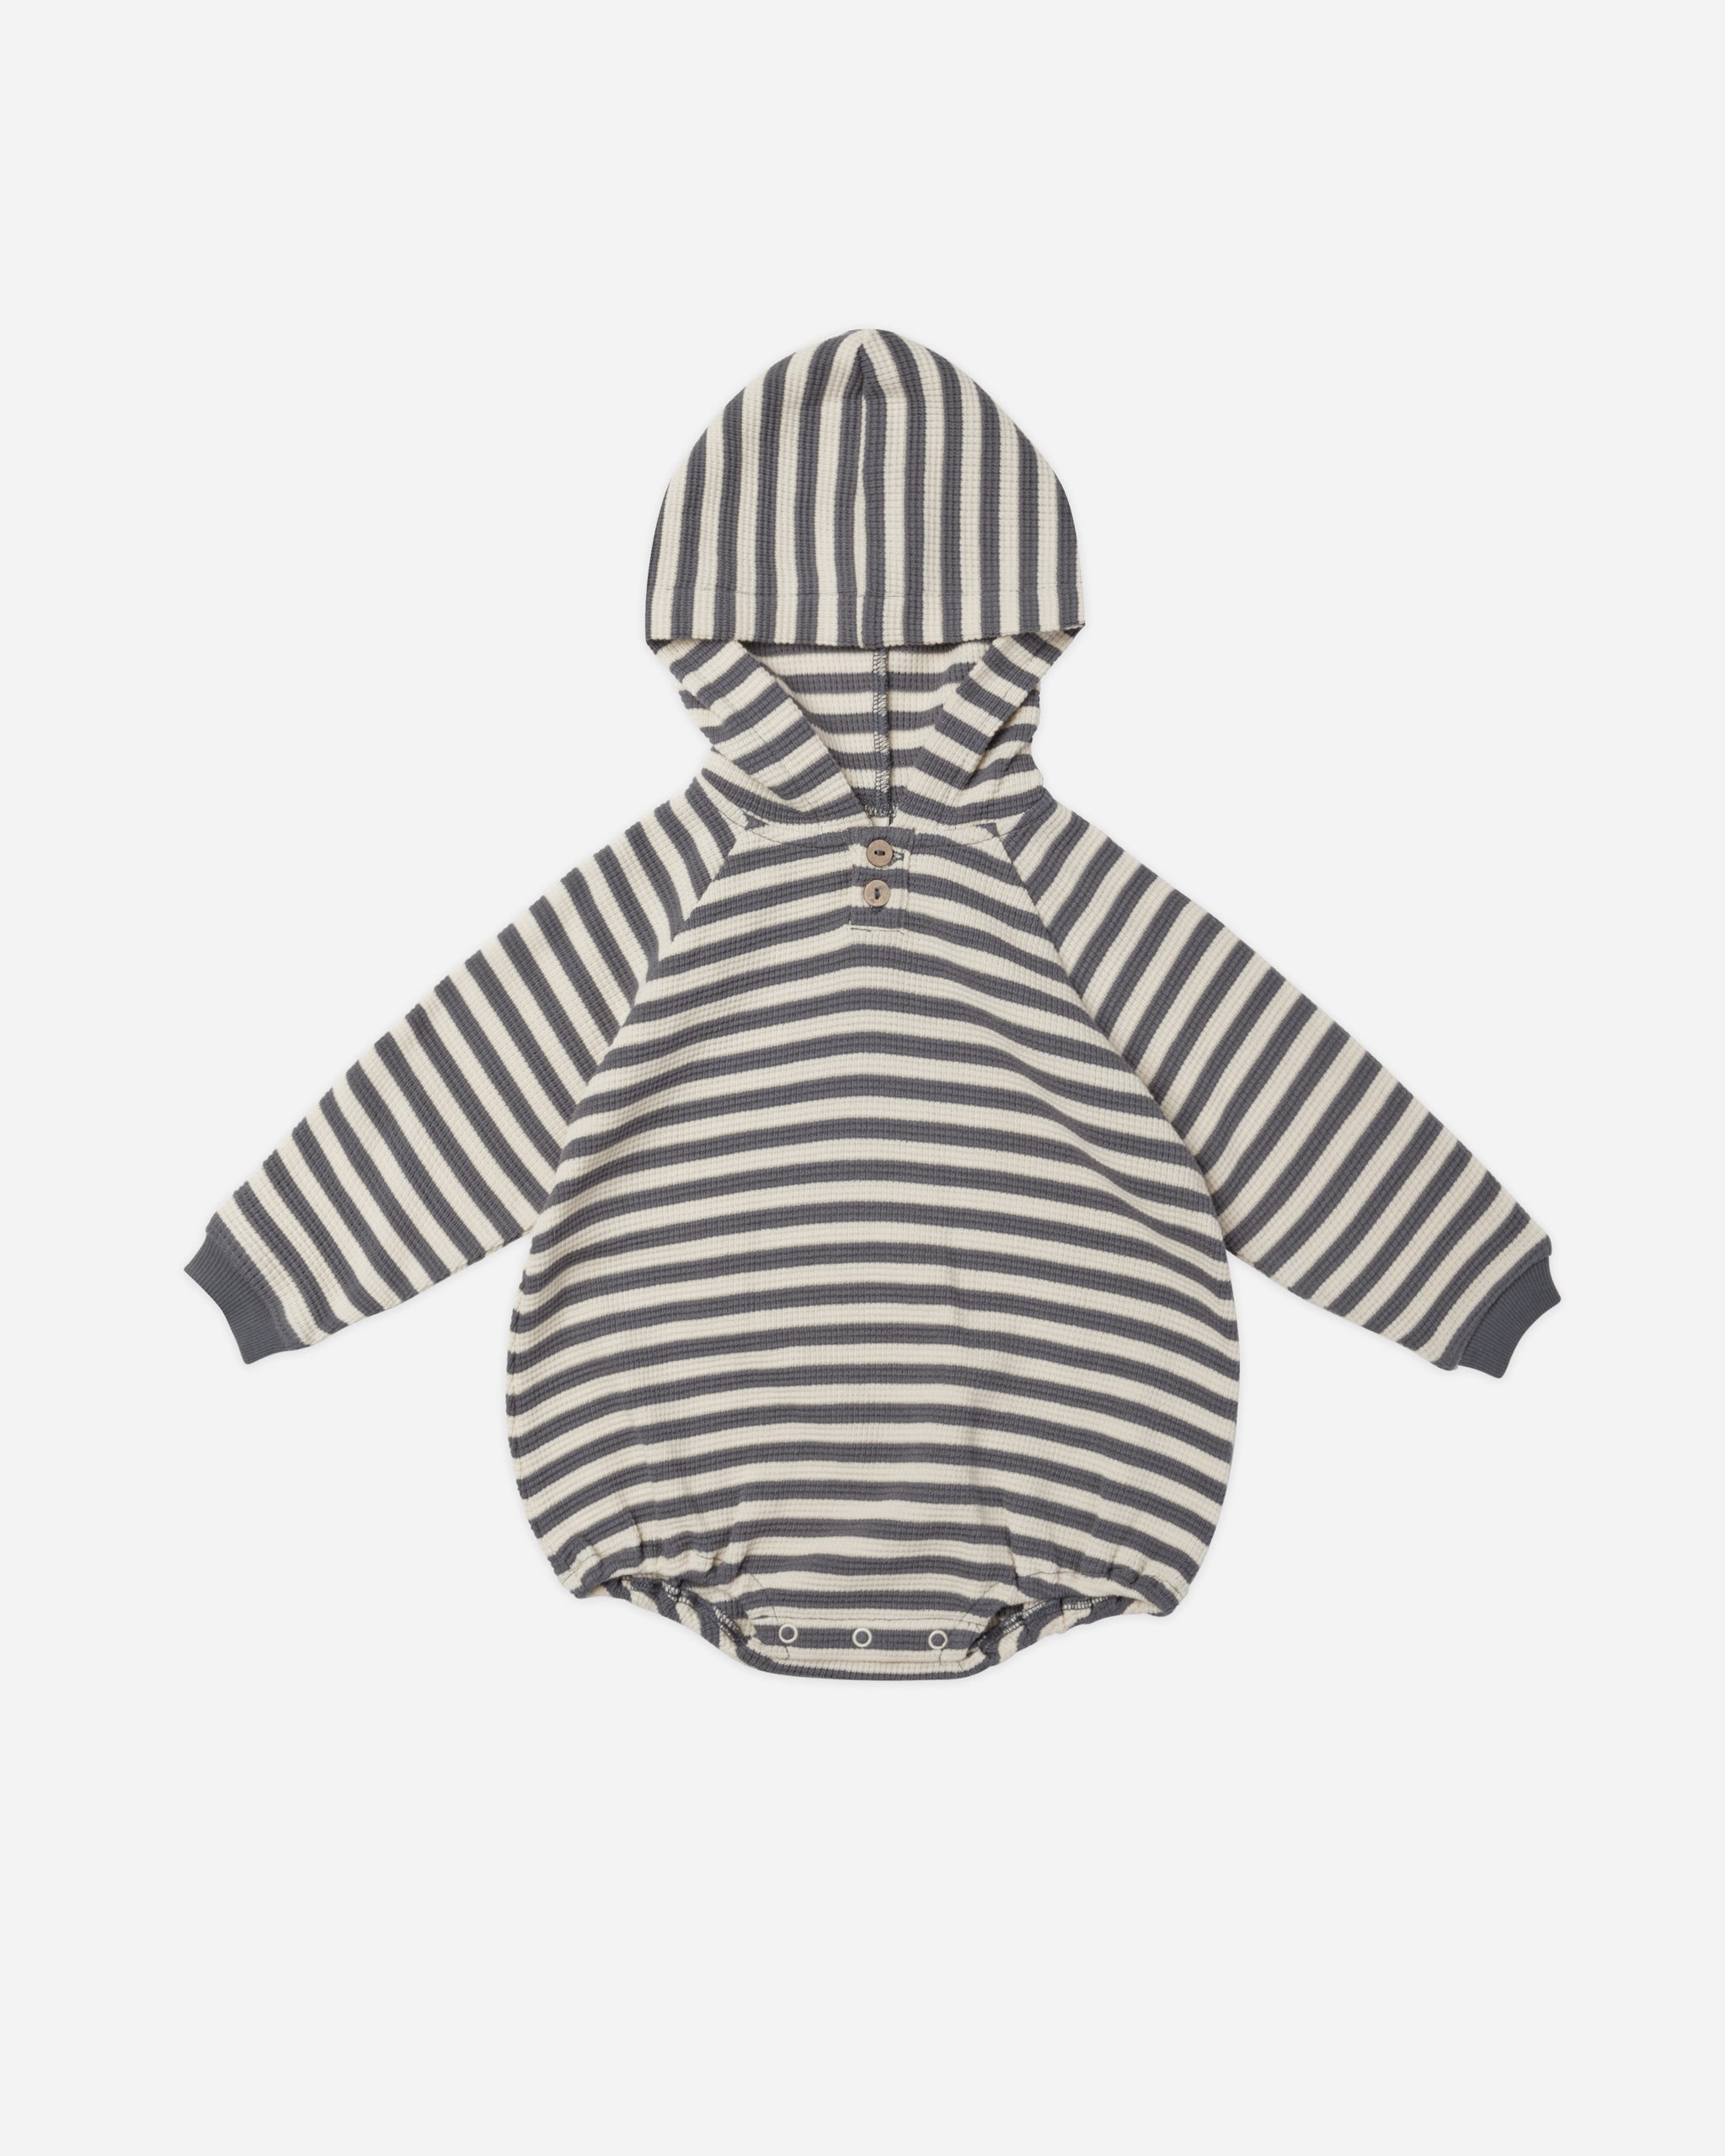 Waffle Hooded Bubble Romper || Navy Stripe - Rylee + Cru | Kids Clothes | Trendy Baby Clothes | Modern Infant Outfits |